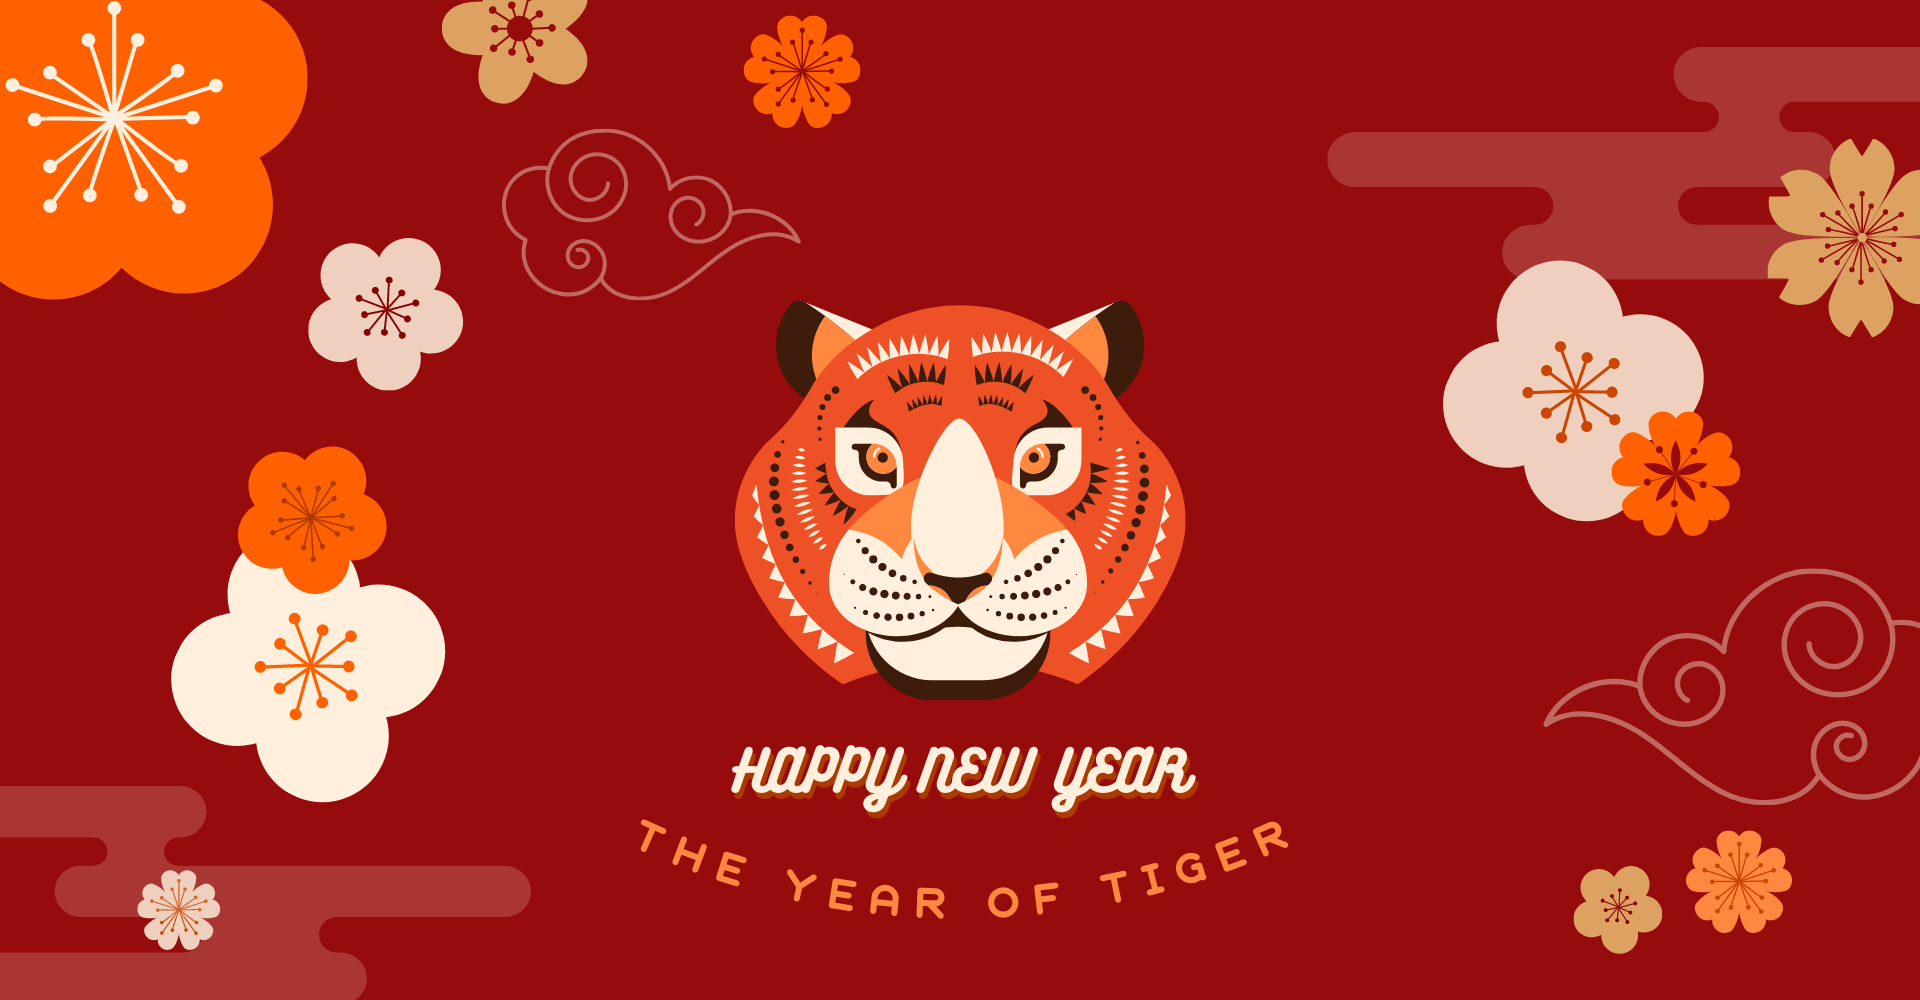 HAPPY LUNAR YEAR OF THE TIGER